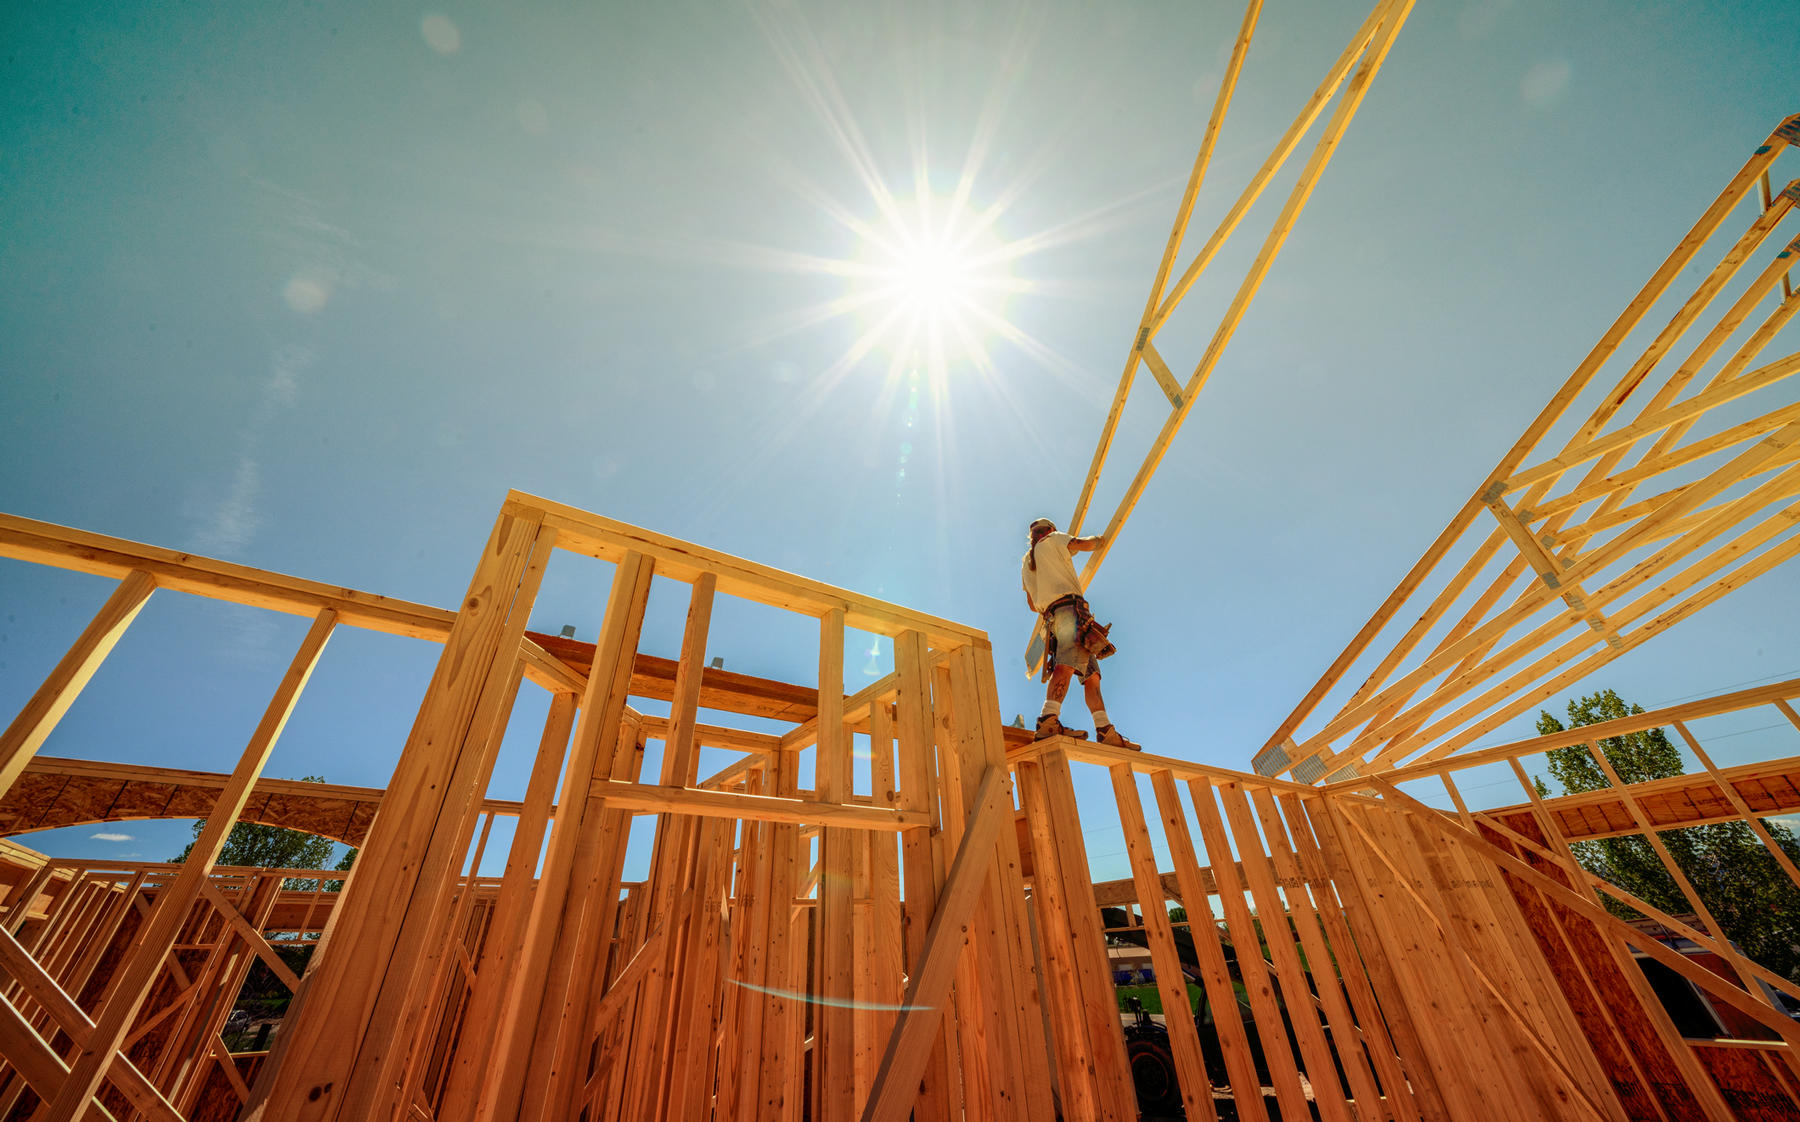 The spread of the coronavirus slowed new residential construction across the U.S. in March, with housing starts dropping 22%, a Census report shows. (Credit: iStock)